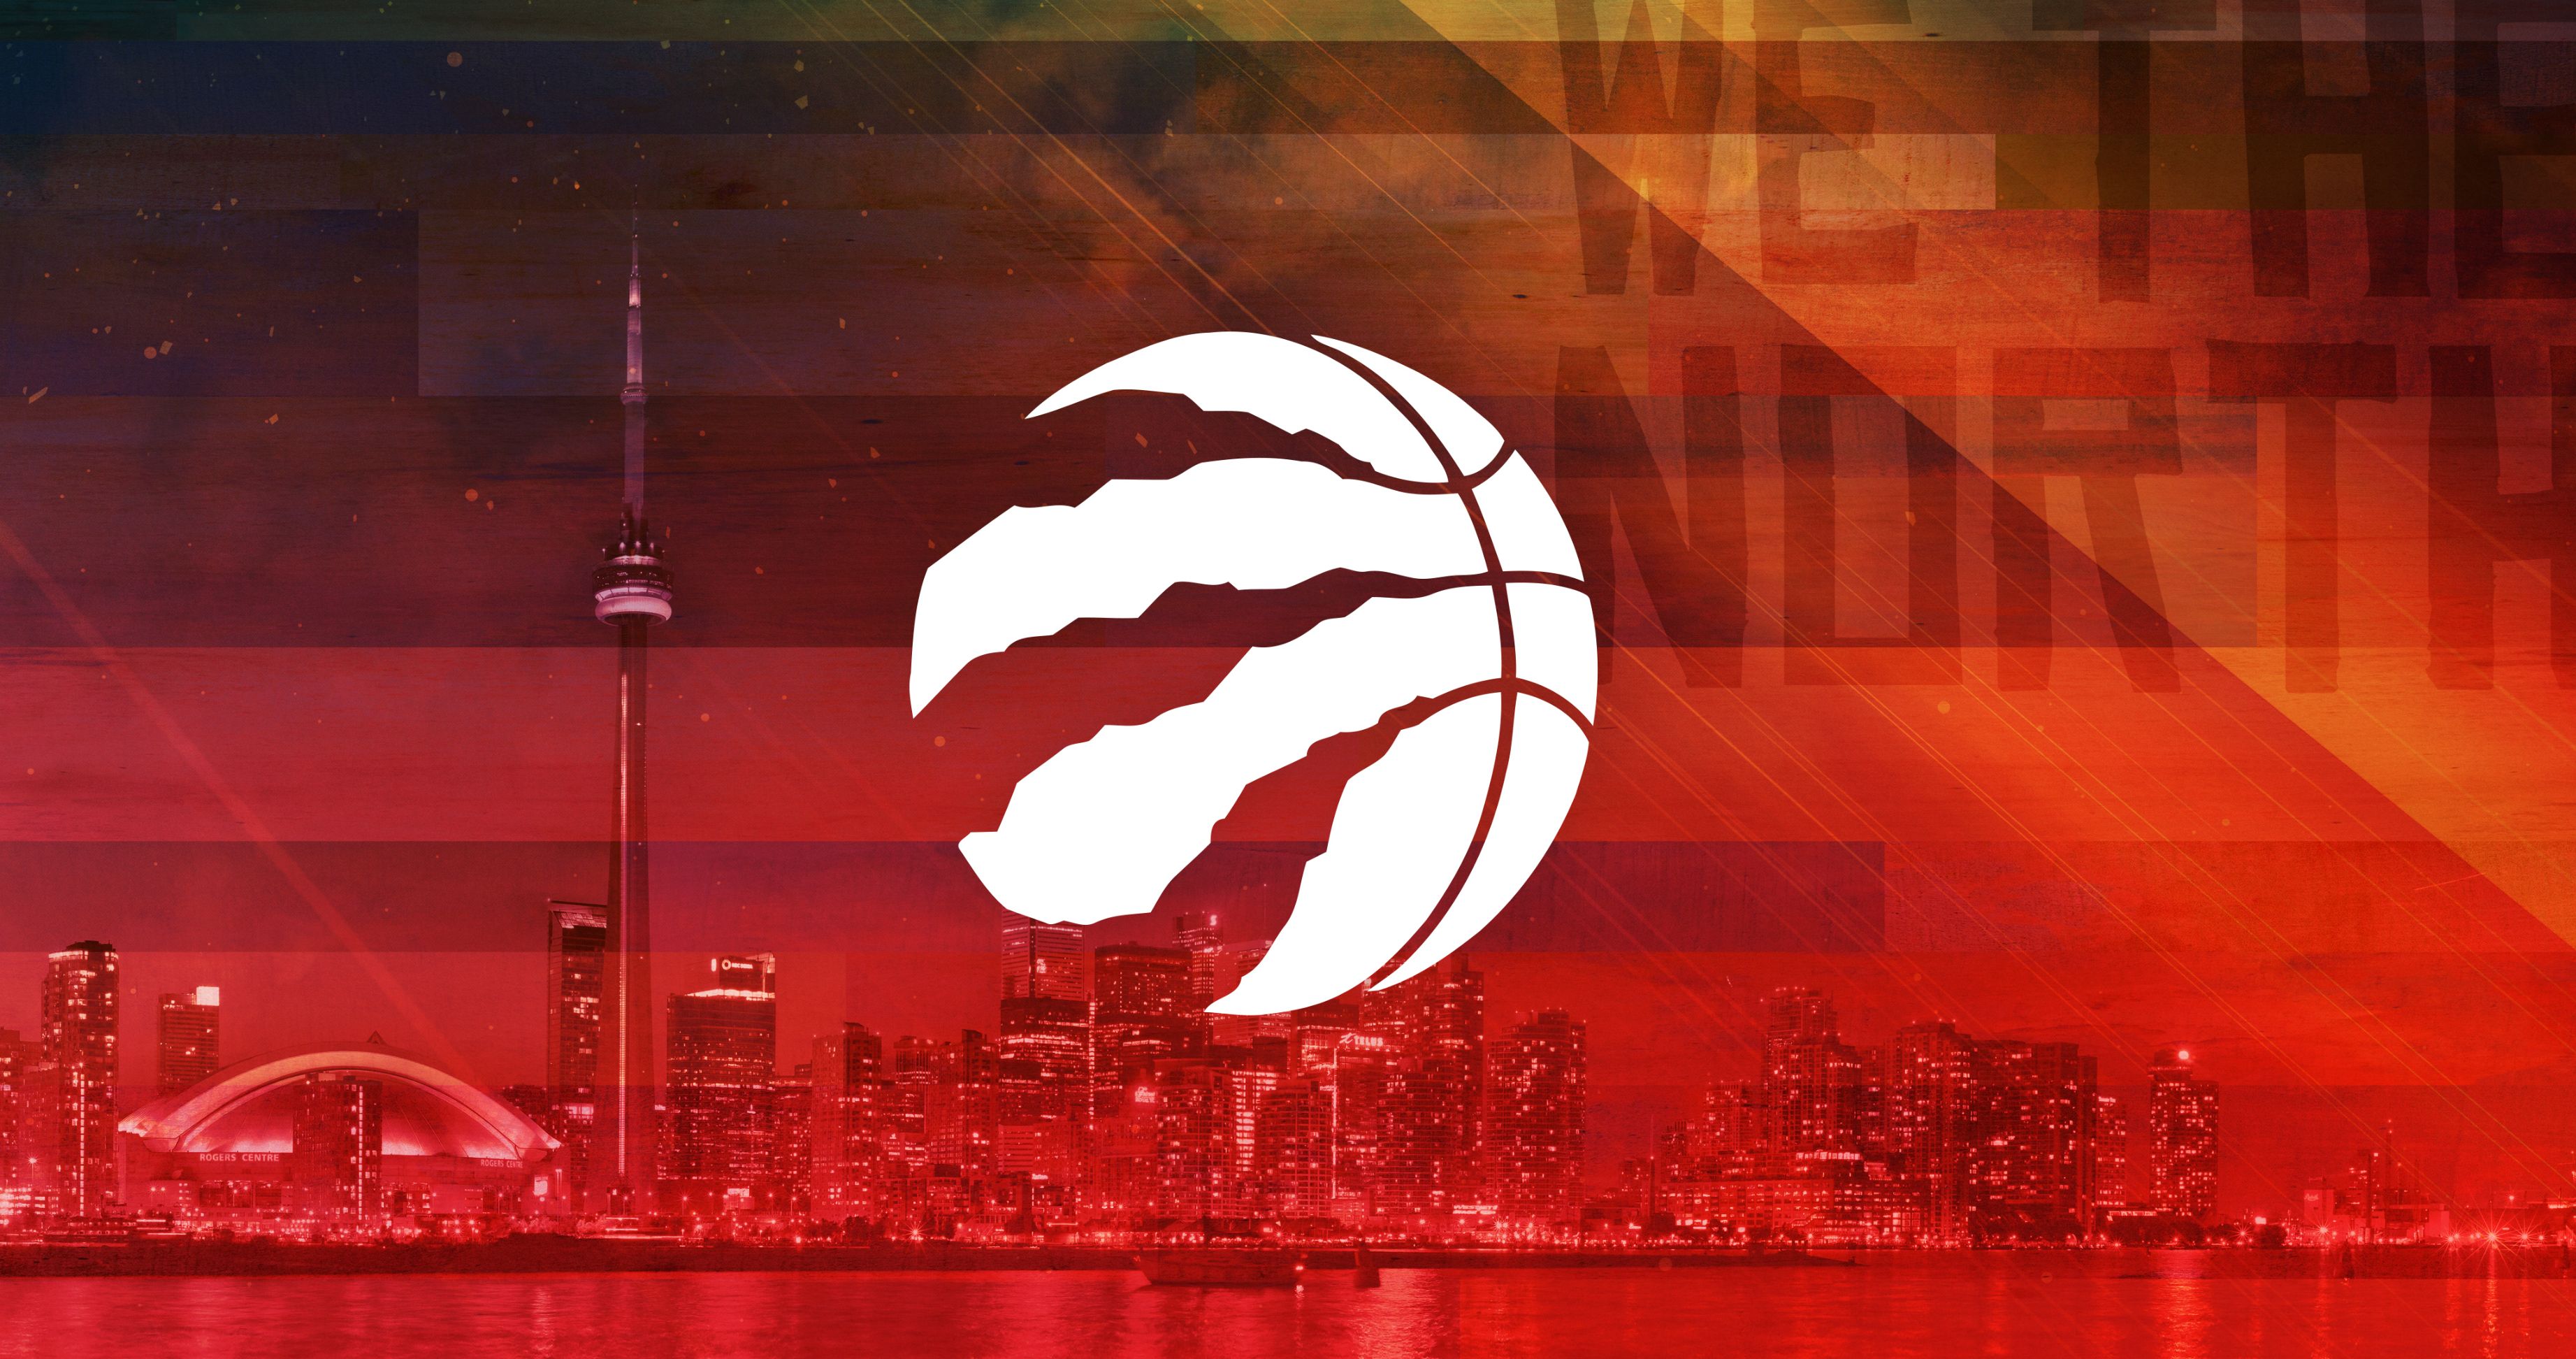 I Made A Toronto Raptors Wallpaper For Myself And Wanted To Share